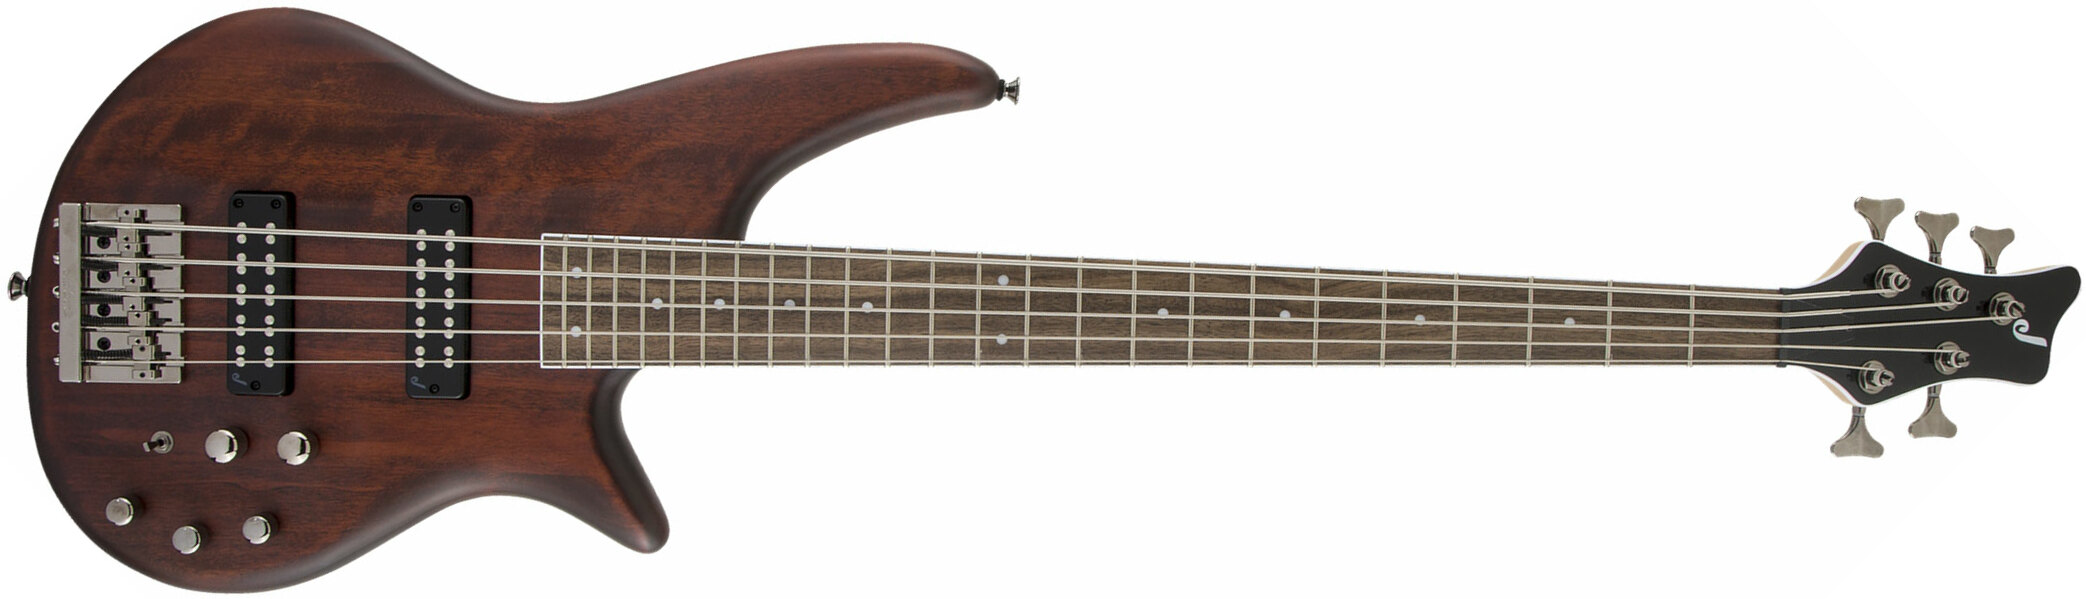 Jackson Spectra Bass Js3v 5c Active Lau - Walnut Stain - Solid body electric bass - Main picture